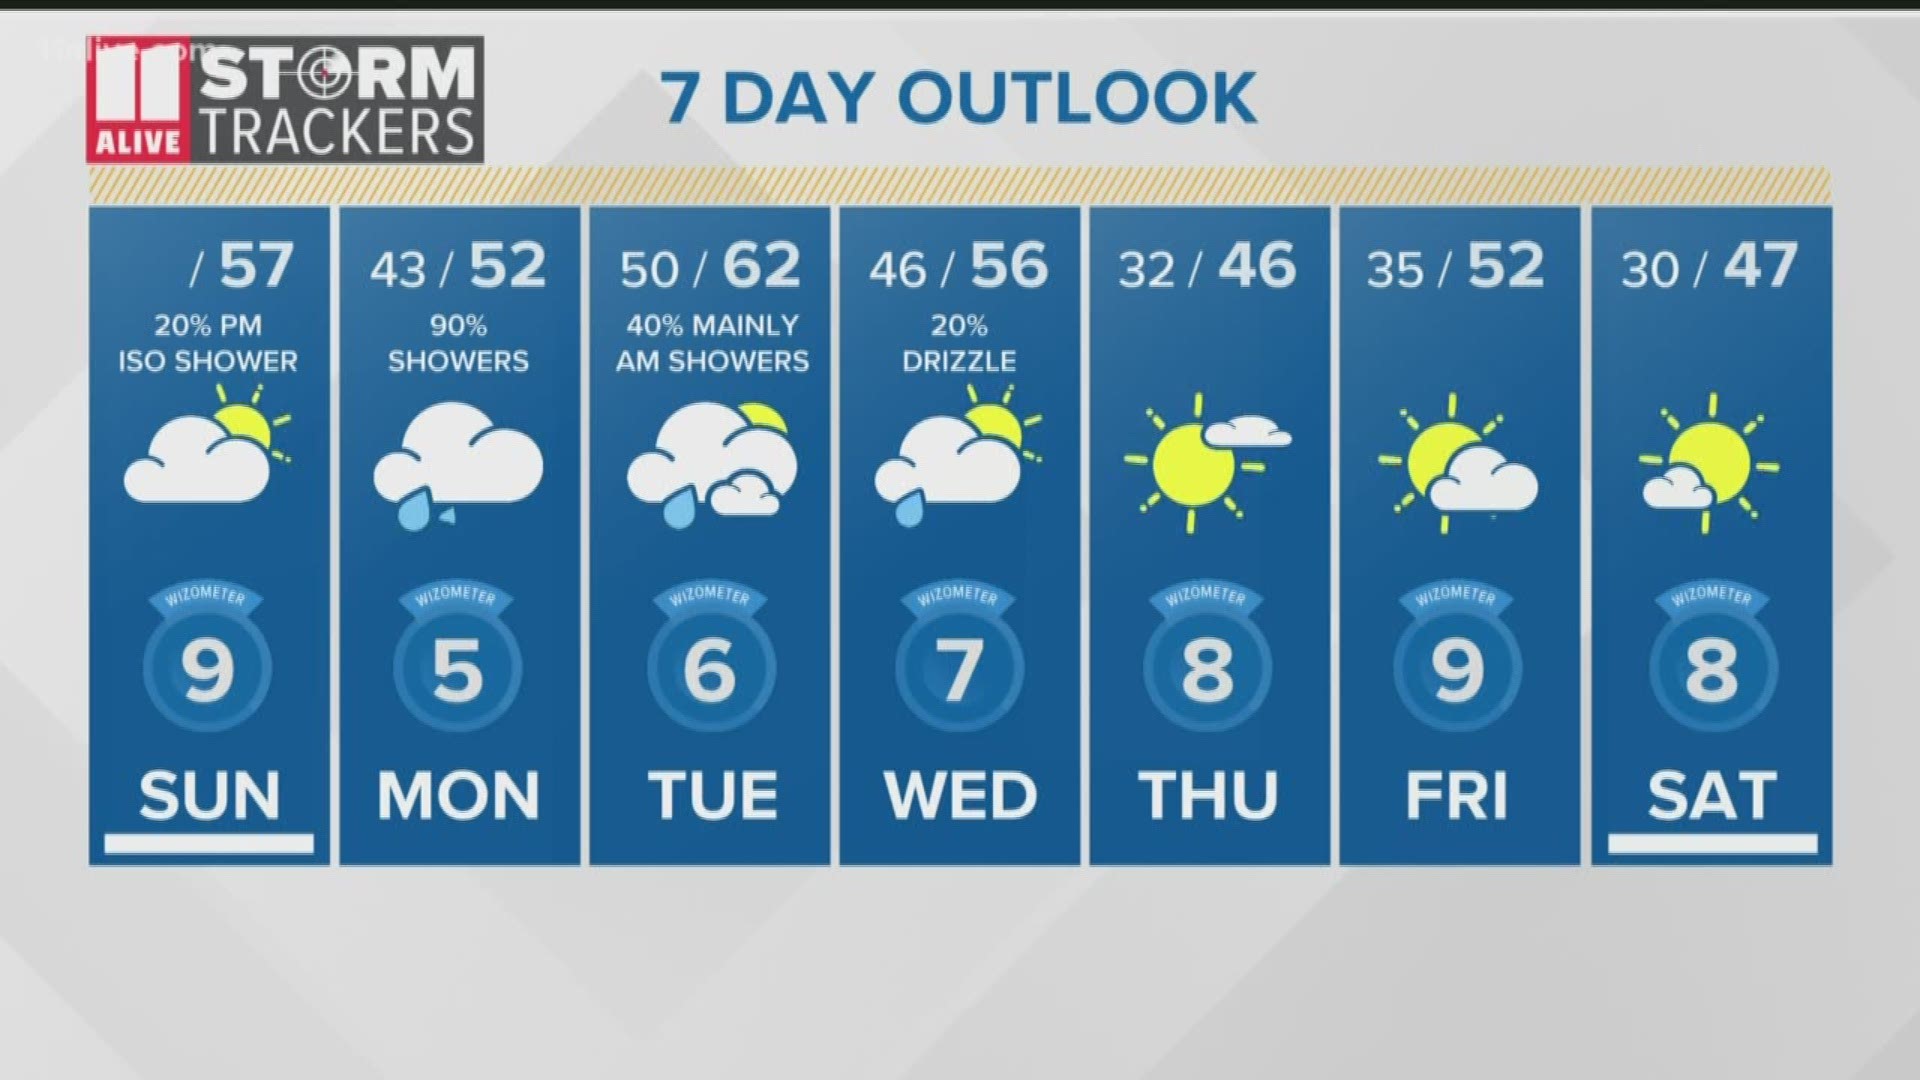 Colder temperatures on the way later this week